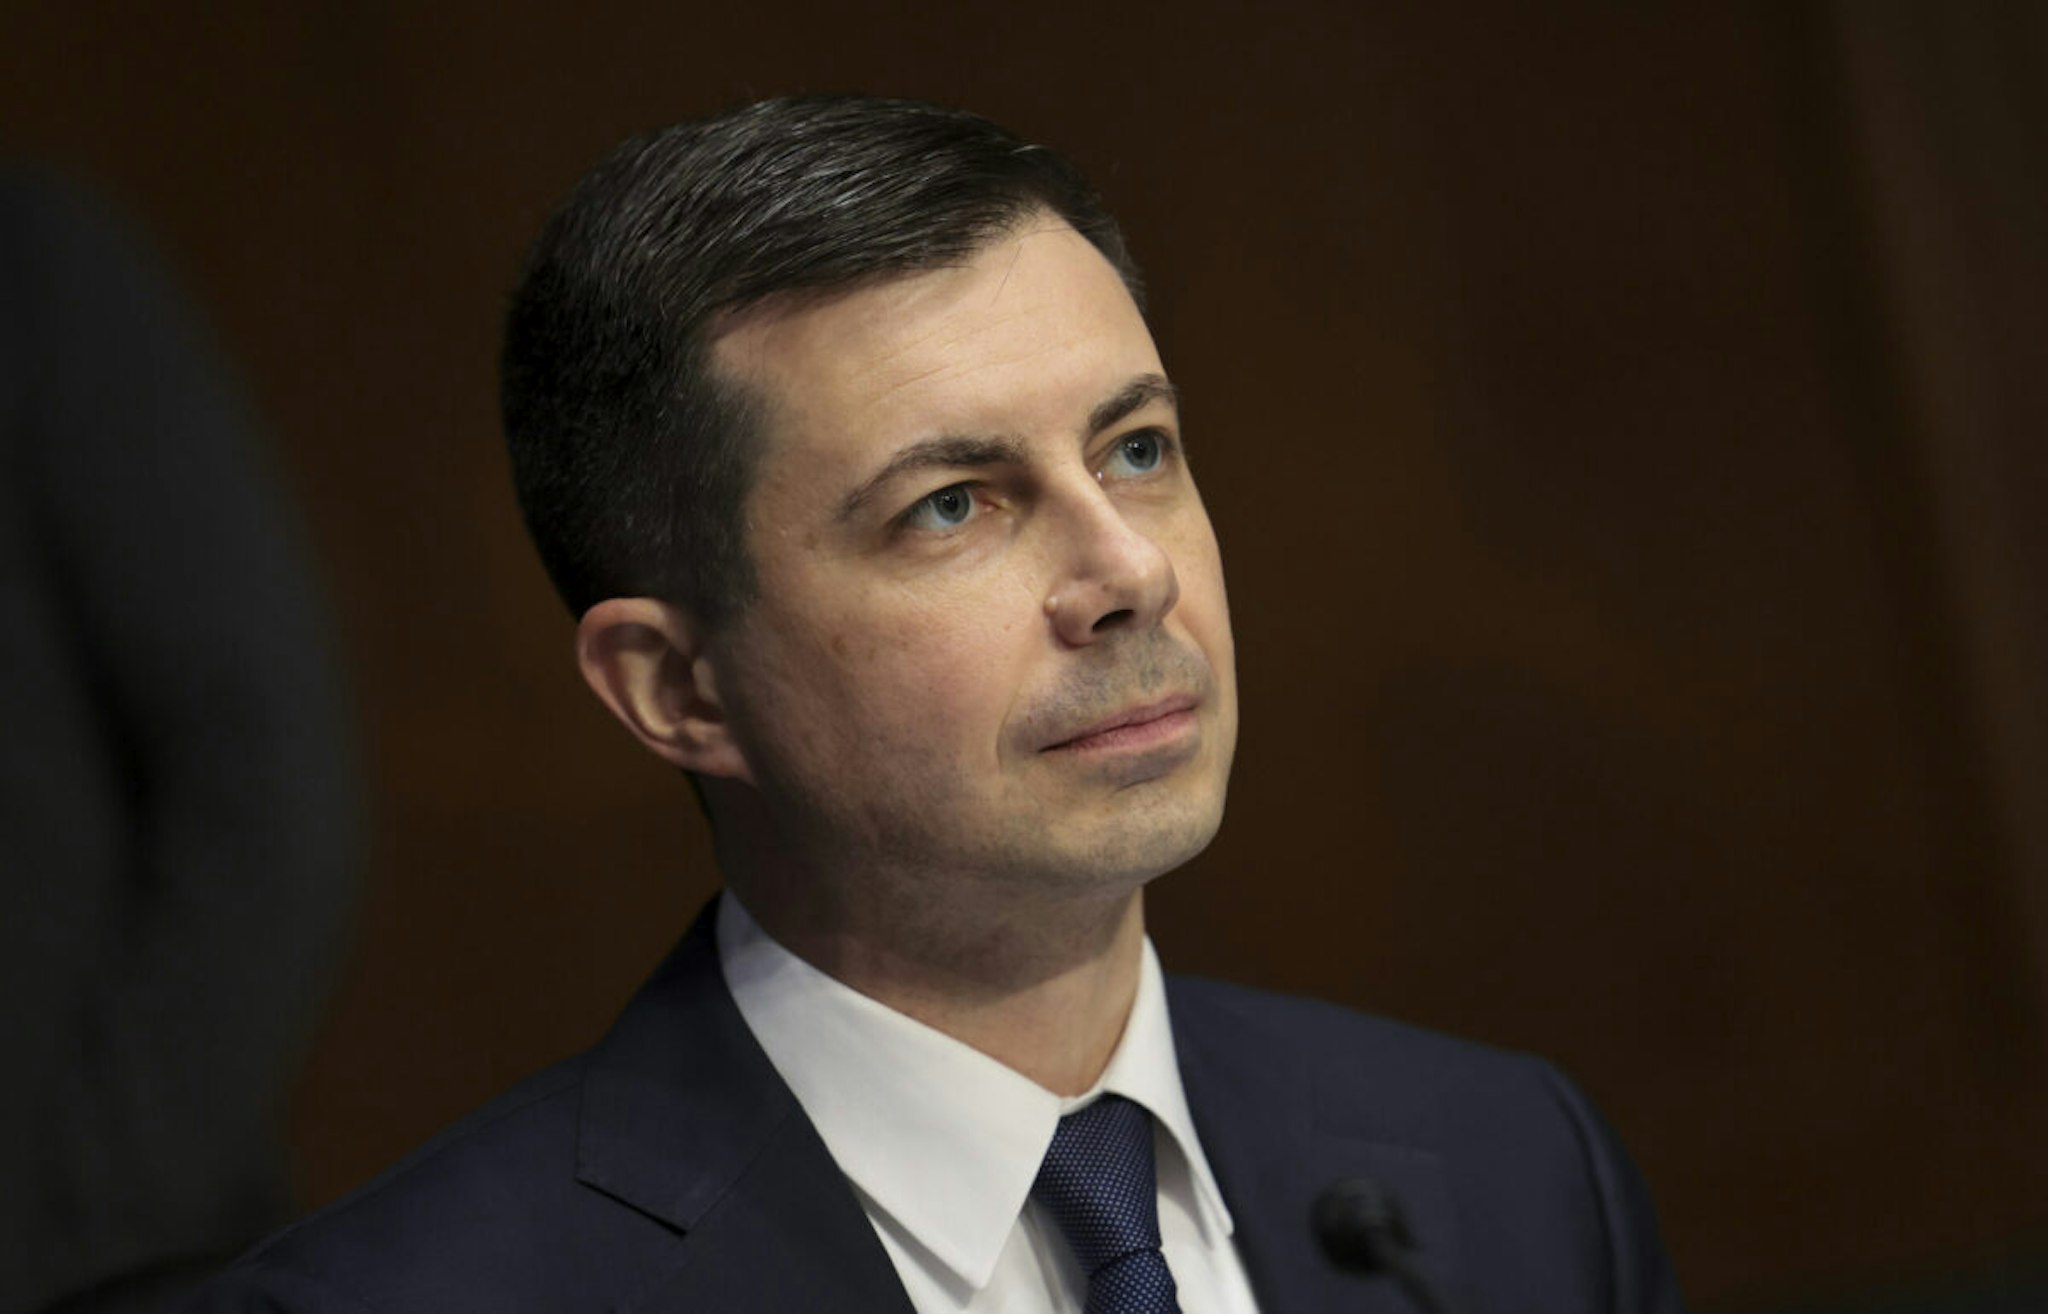 MARCH 02: U.S. Transportation Secretary Pete Buttigieg testifies before the Senate Environment and Public Works Committee at the Dirksen Senate Office Building on March 02, 2022 in Washington, DC.